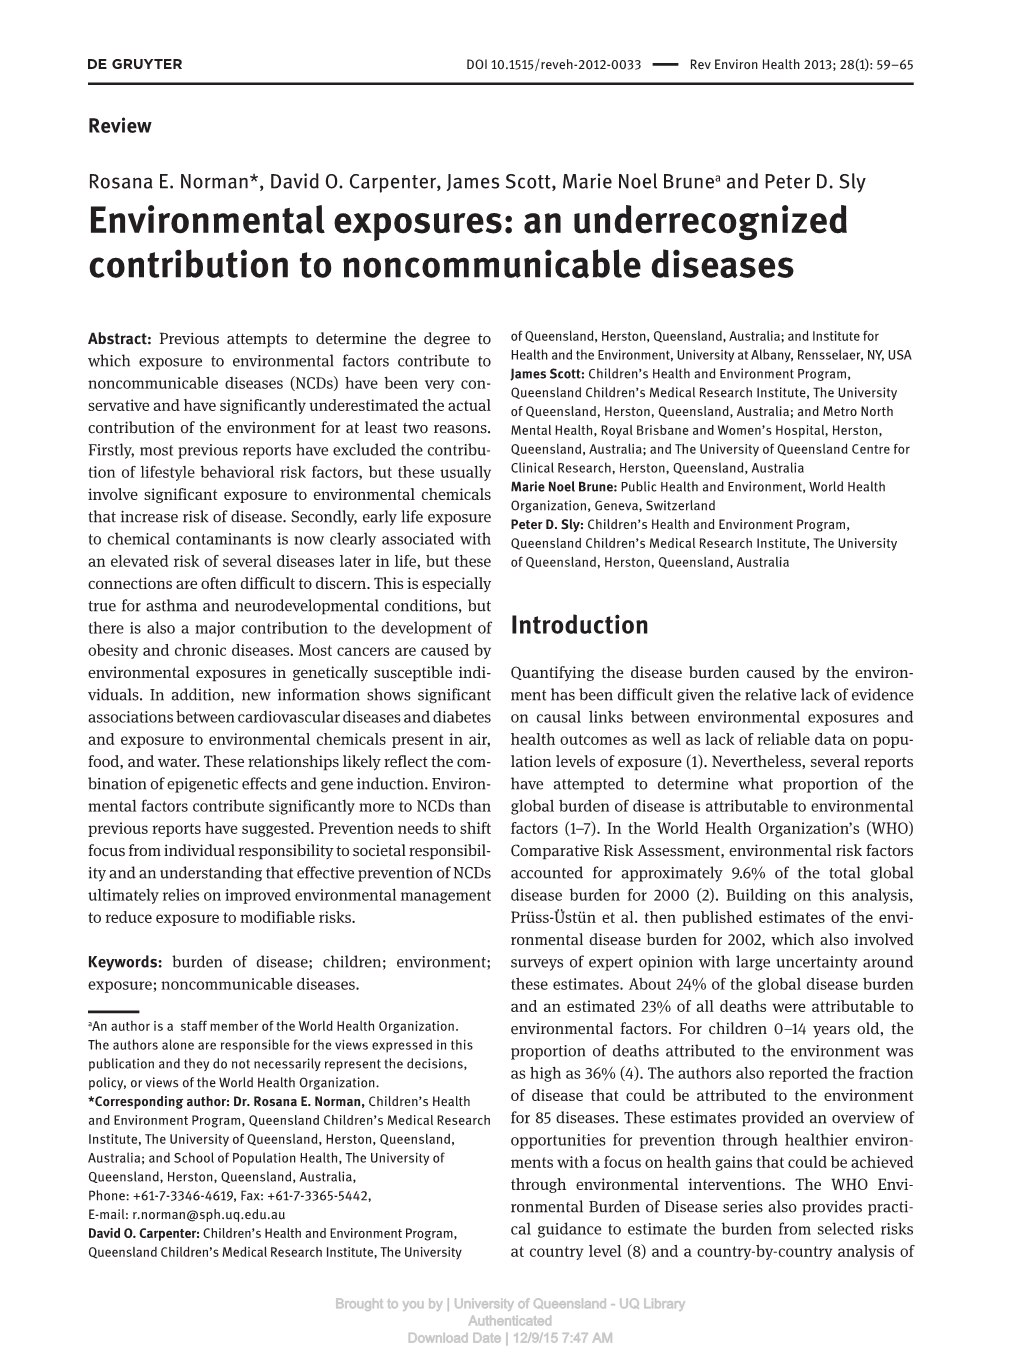 Environmental Exposures: an Underrecognized Contribution to Noncommunicable Diseases